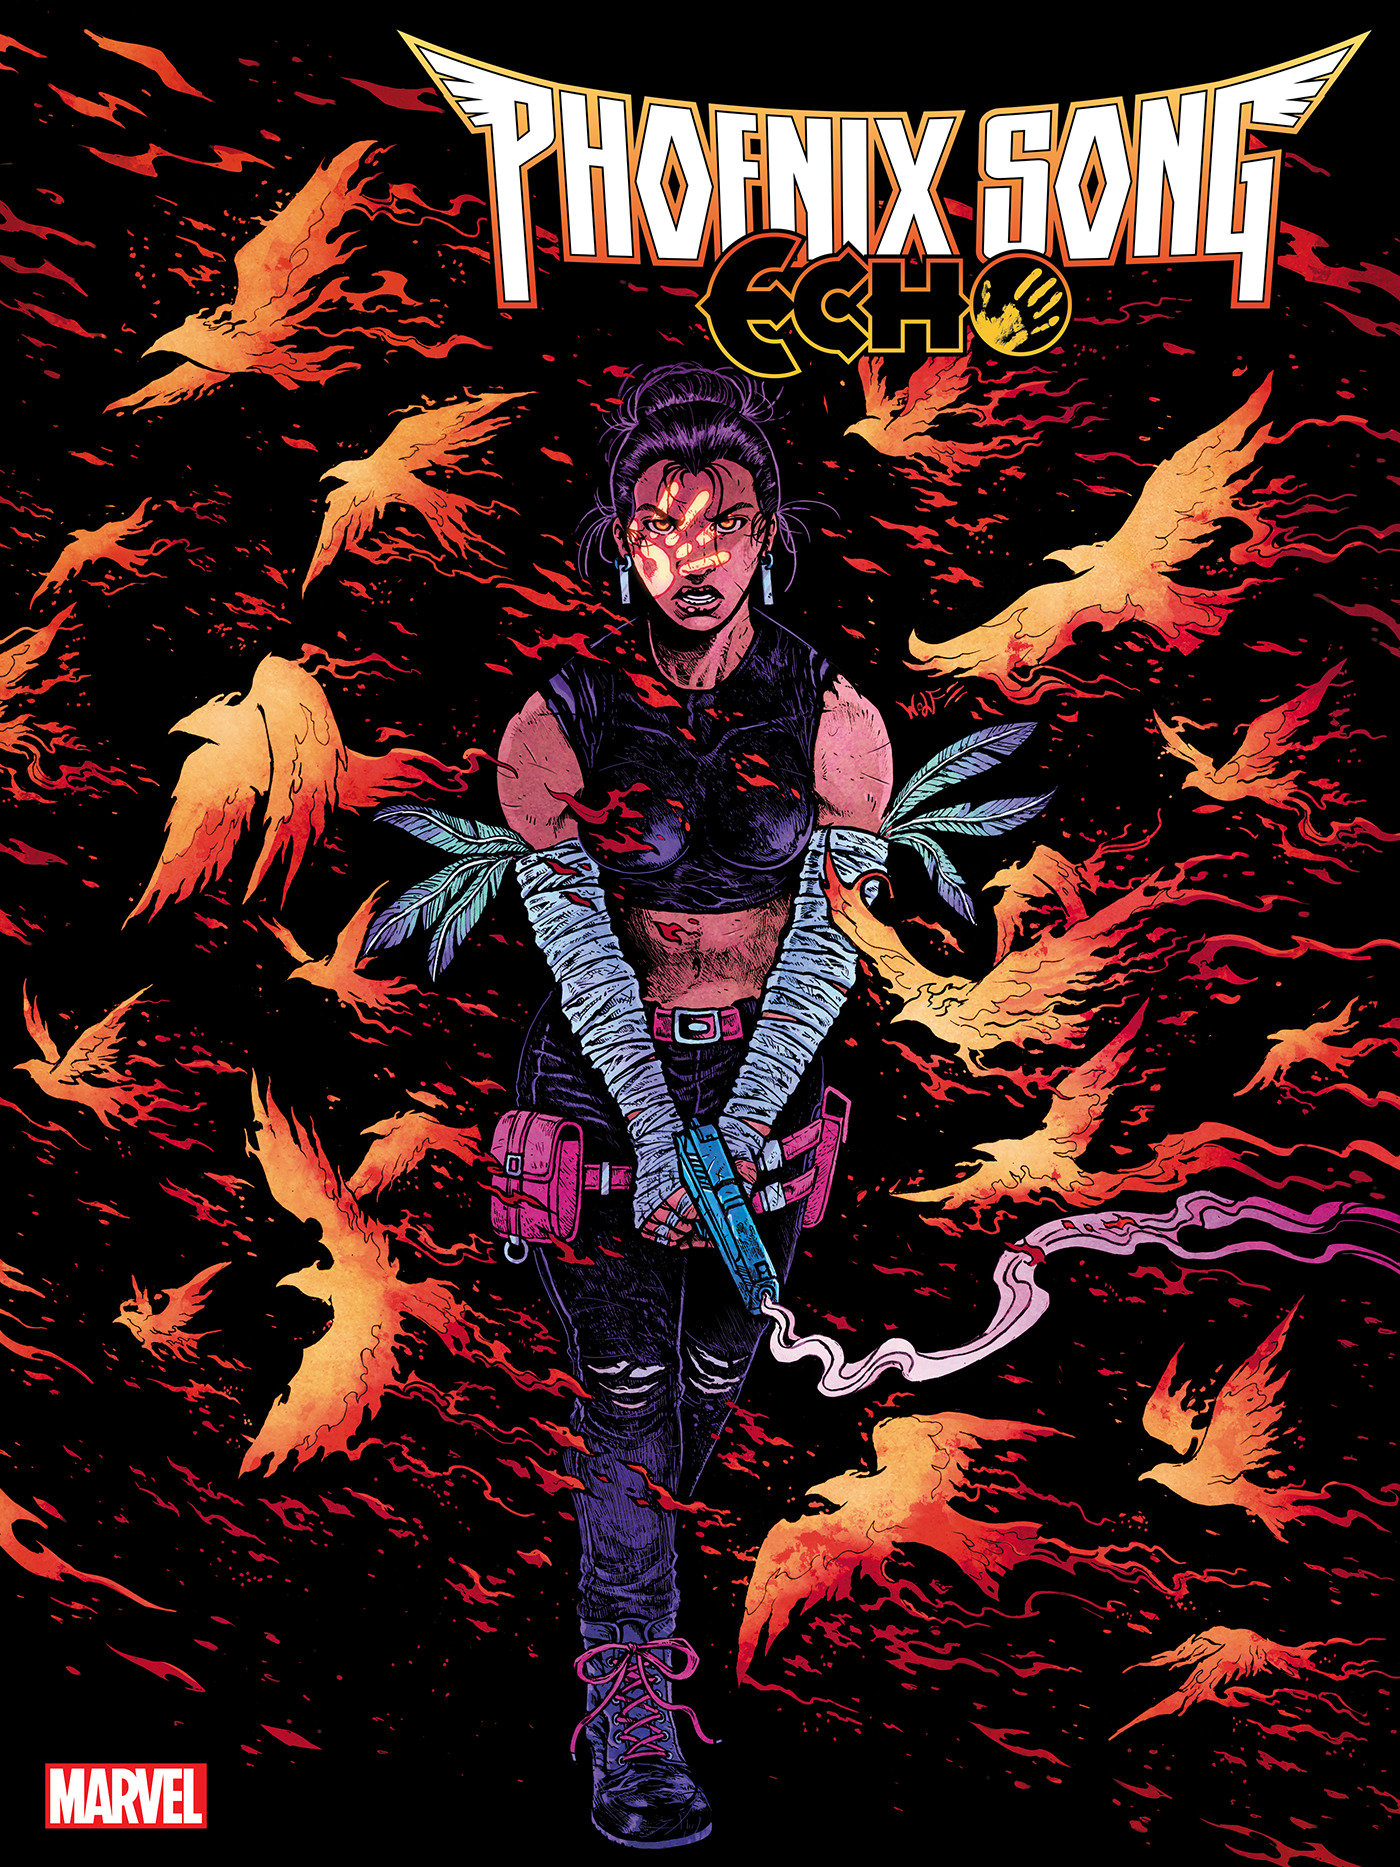 Phoenix Song Echo #5 Wolf Variant (Of 5)